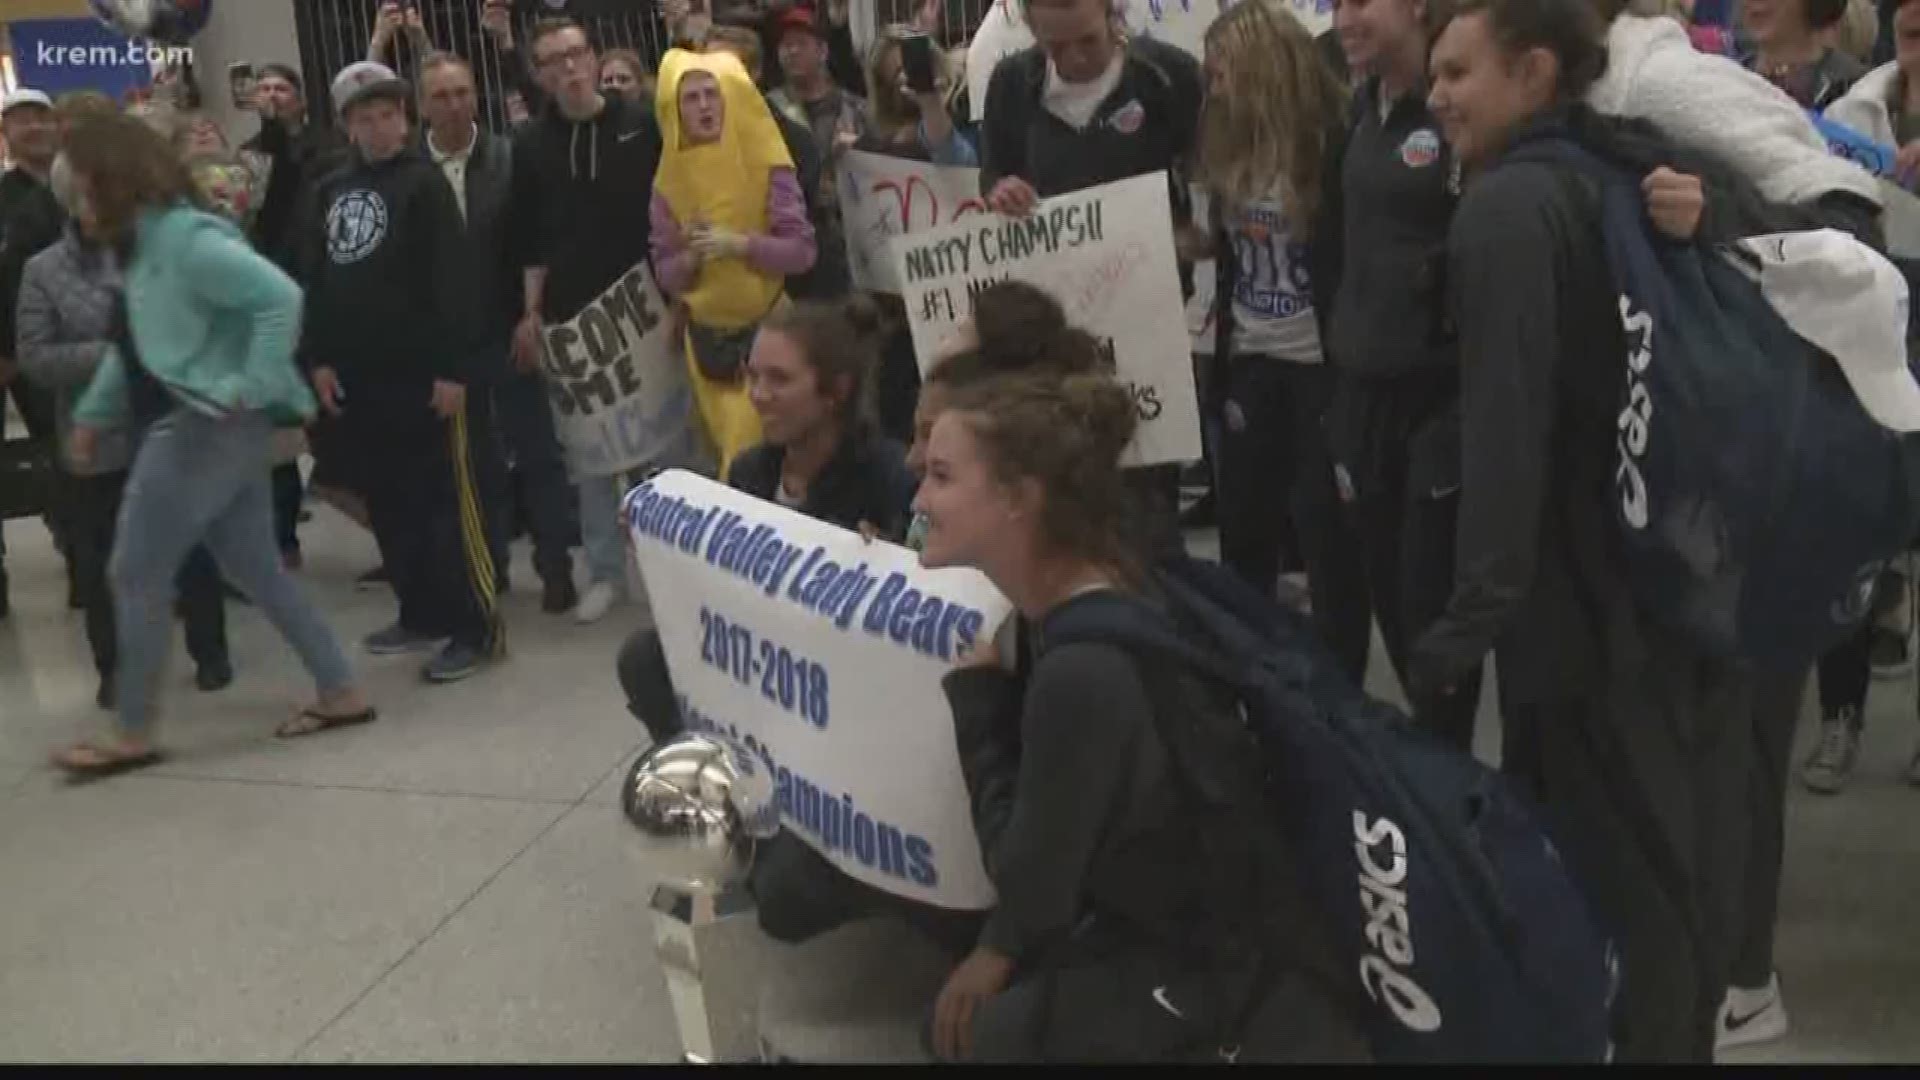 The Central Valley girls basketball team returned home from New York with a warm ovation from the CV community at the Spokane Airport.